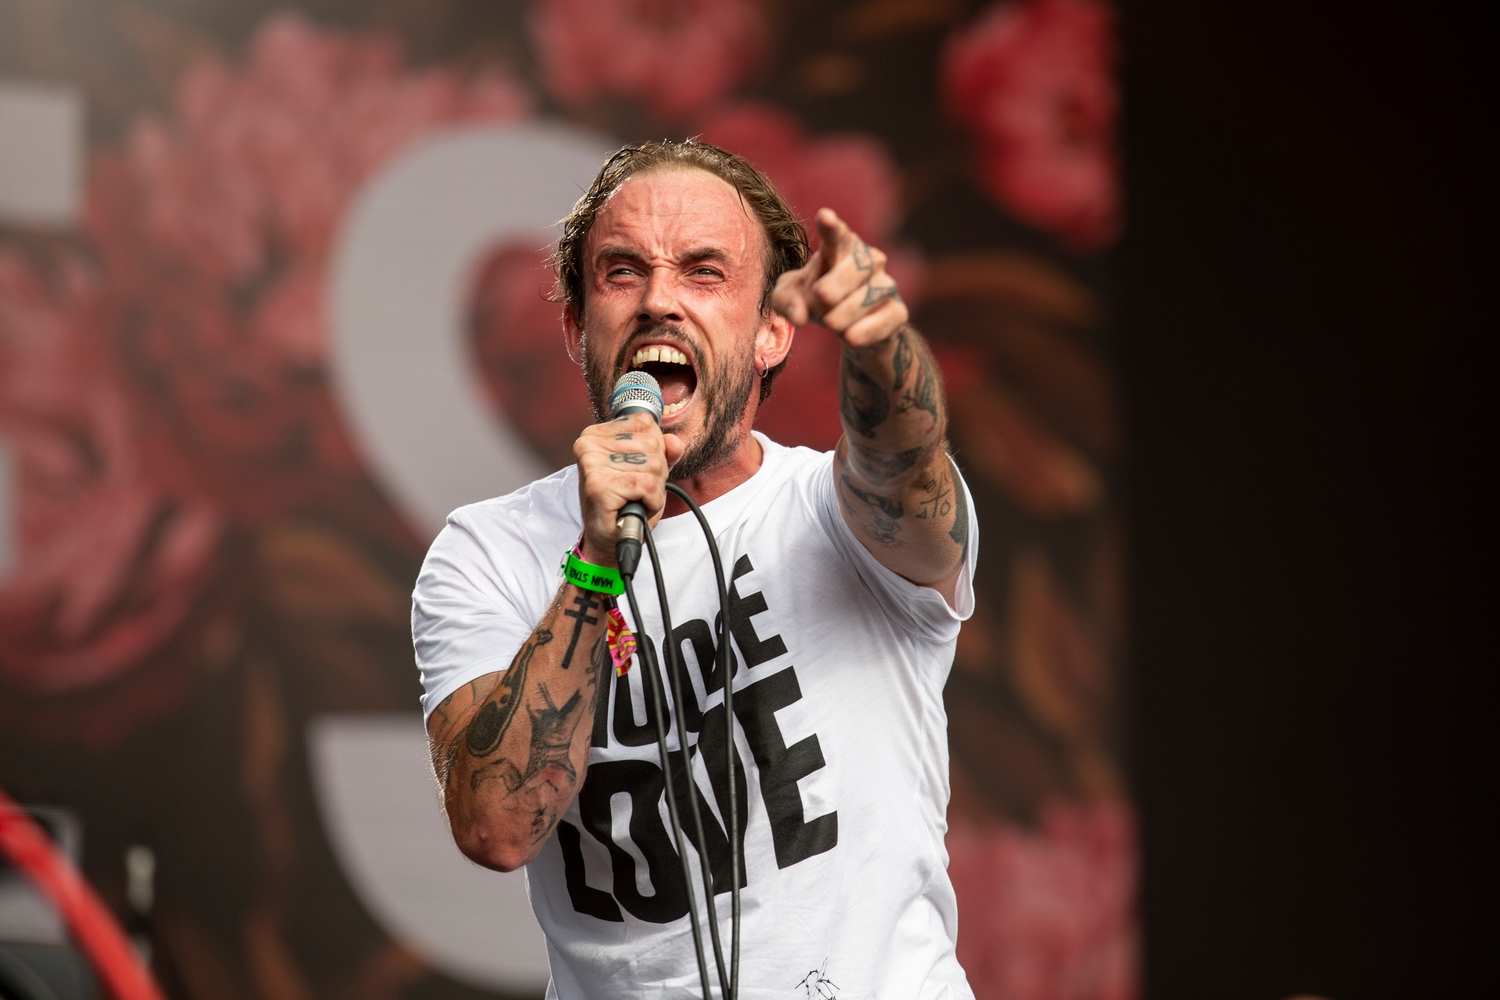 IDLES, PUP, White Lies and more are headed to Pukkelpop 2019